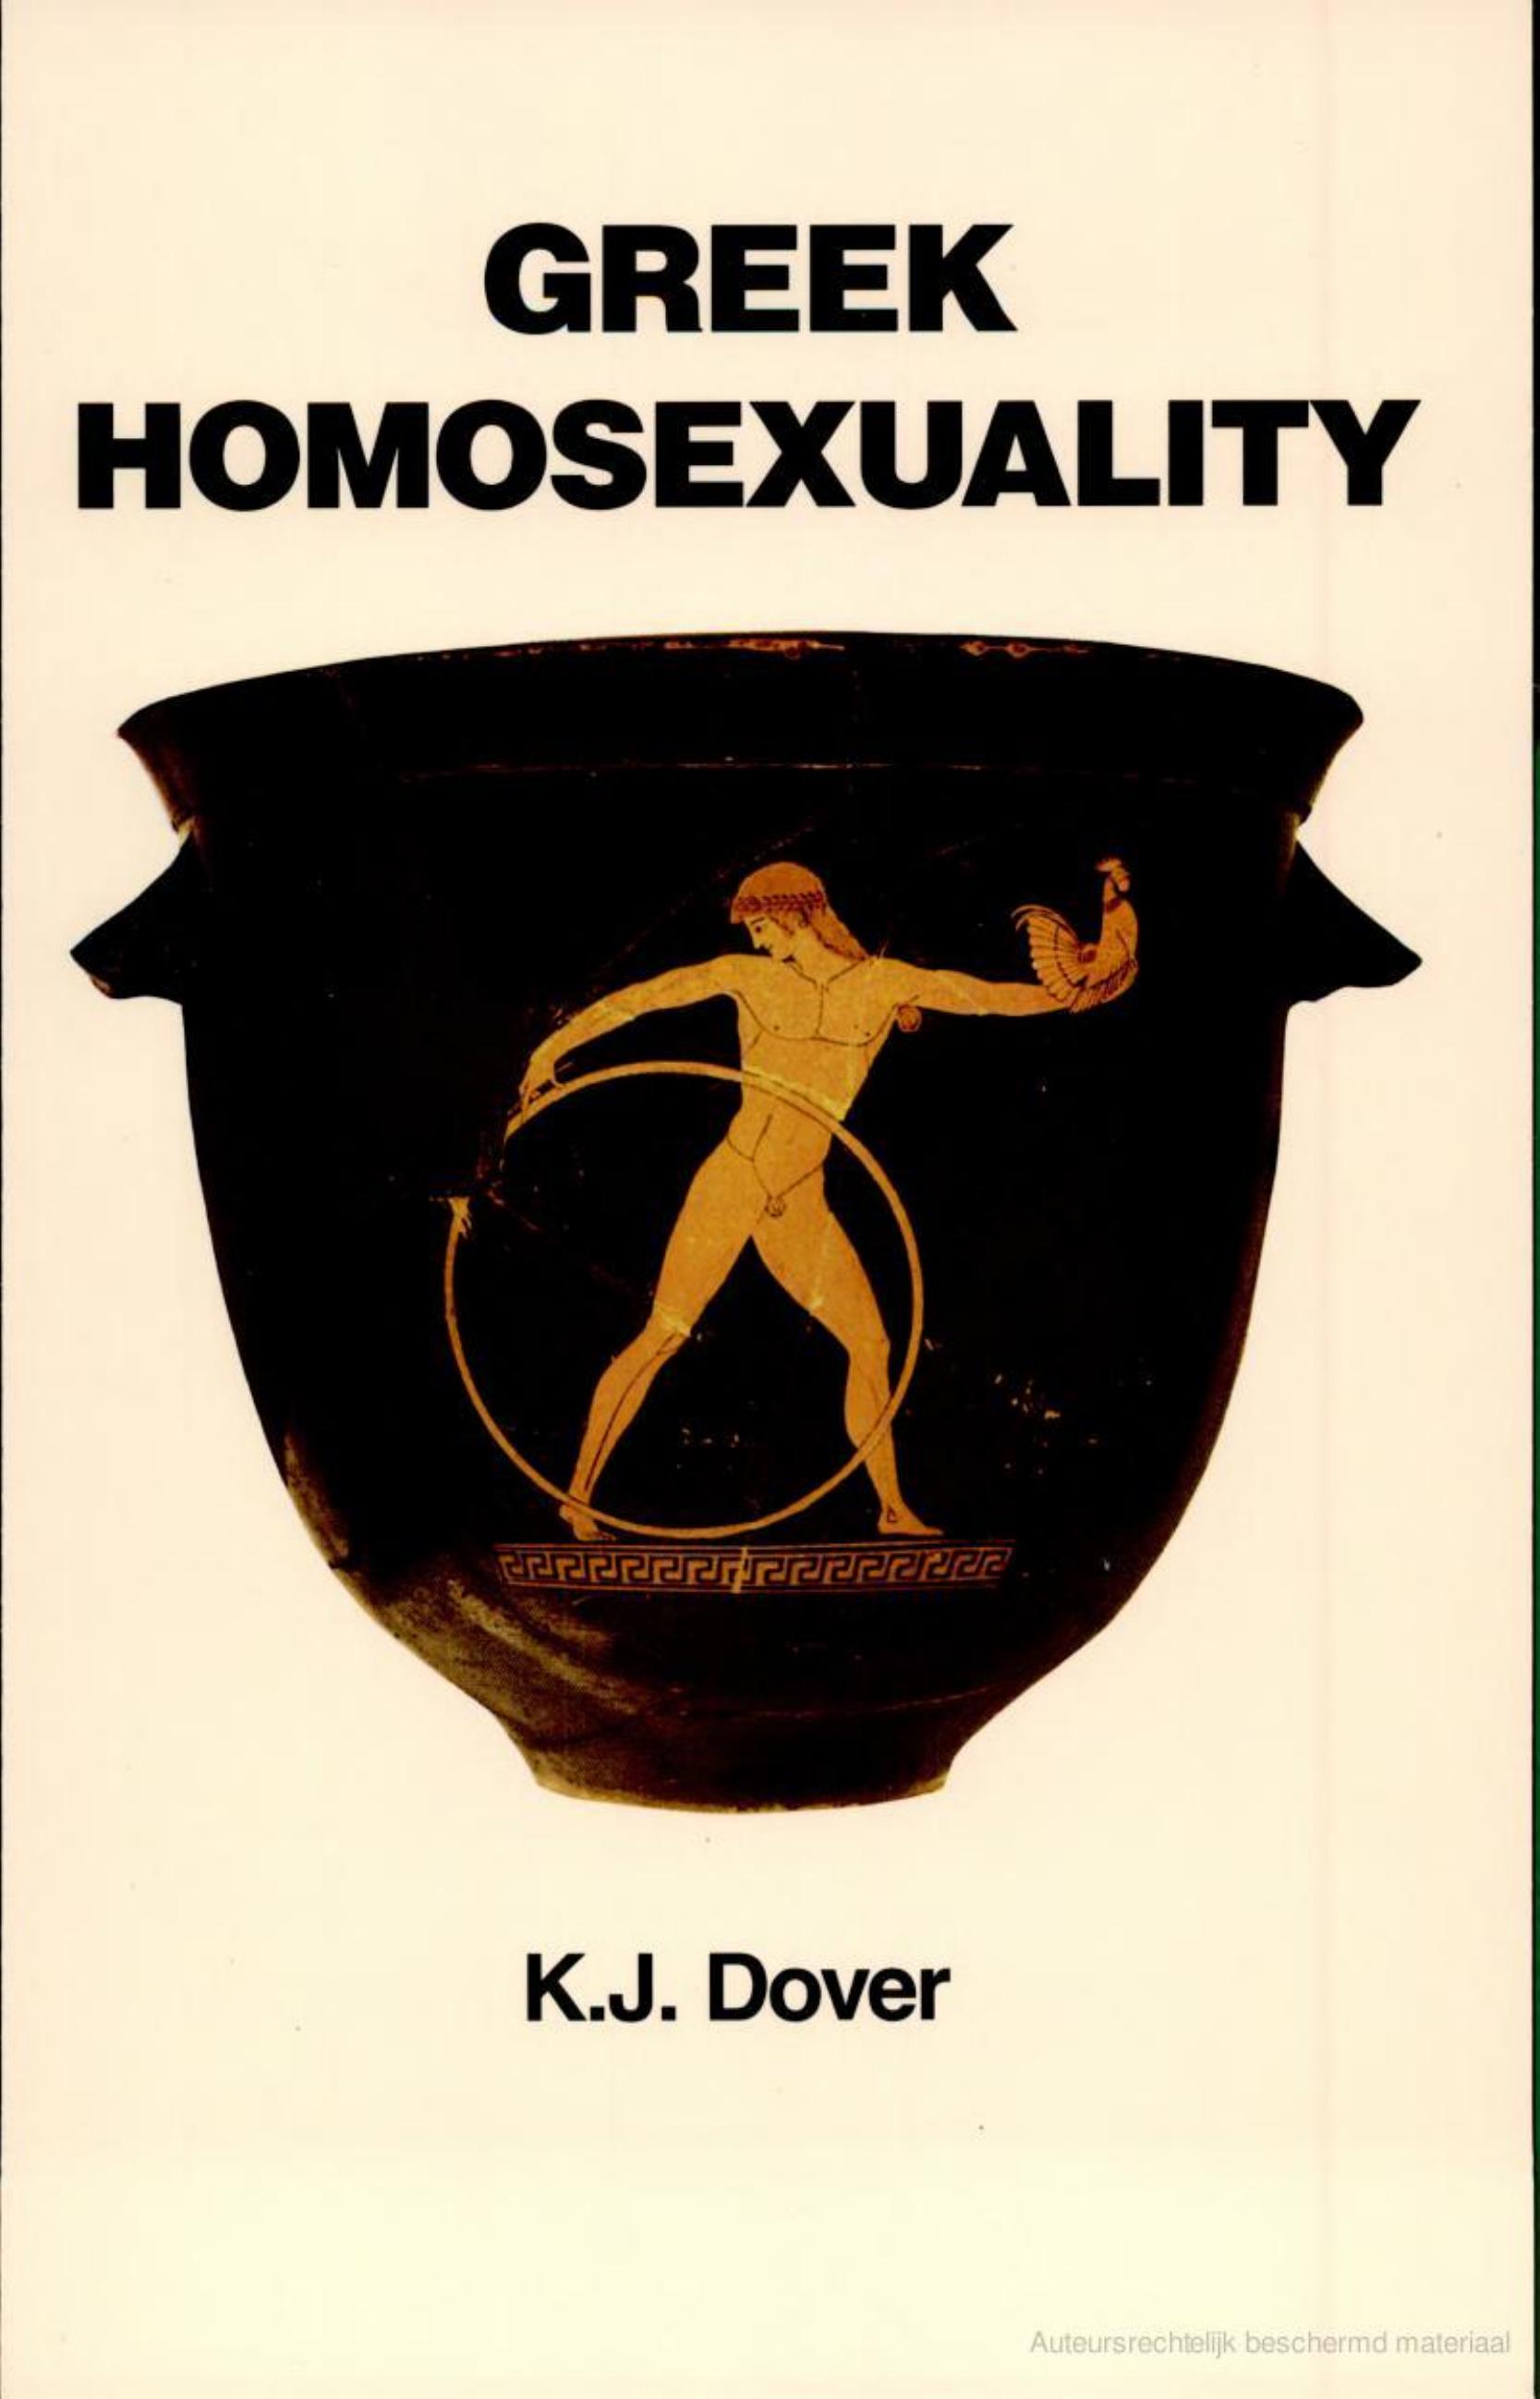 Greek Homosexuality by K J Dover